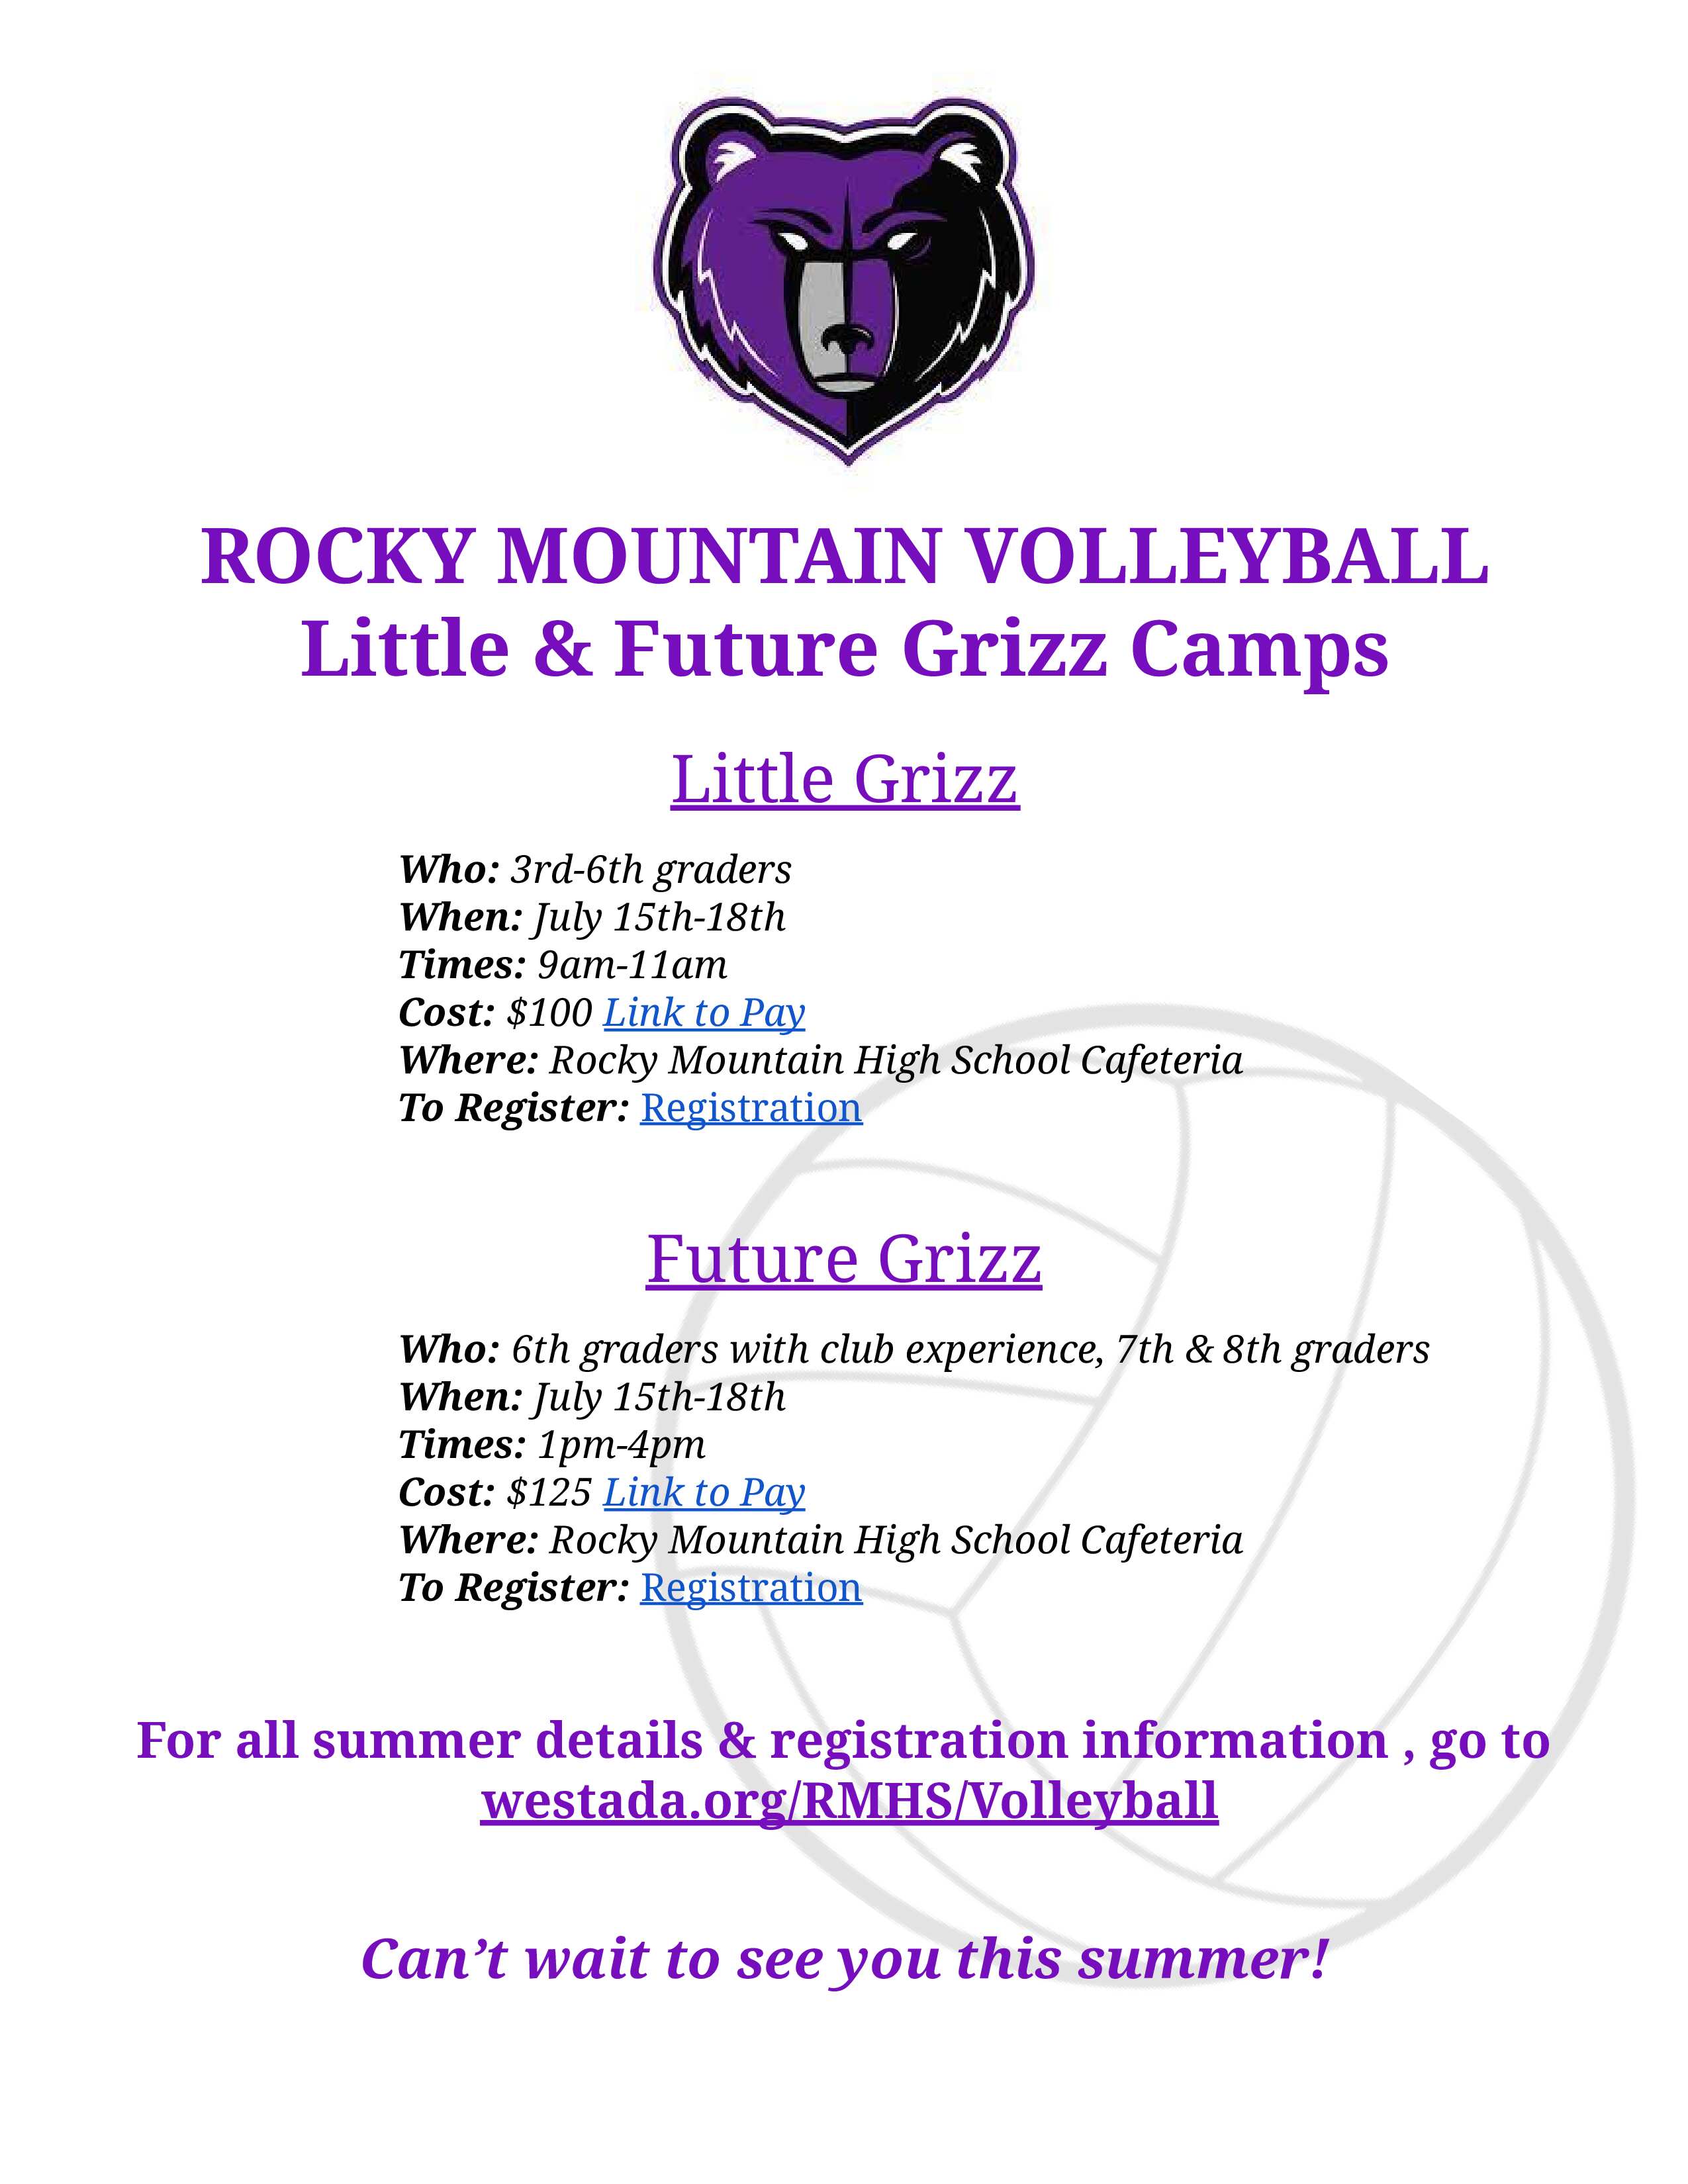 RMHS Volleyball 3-6 graders